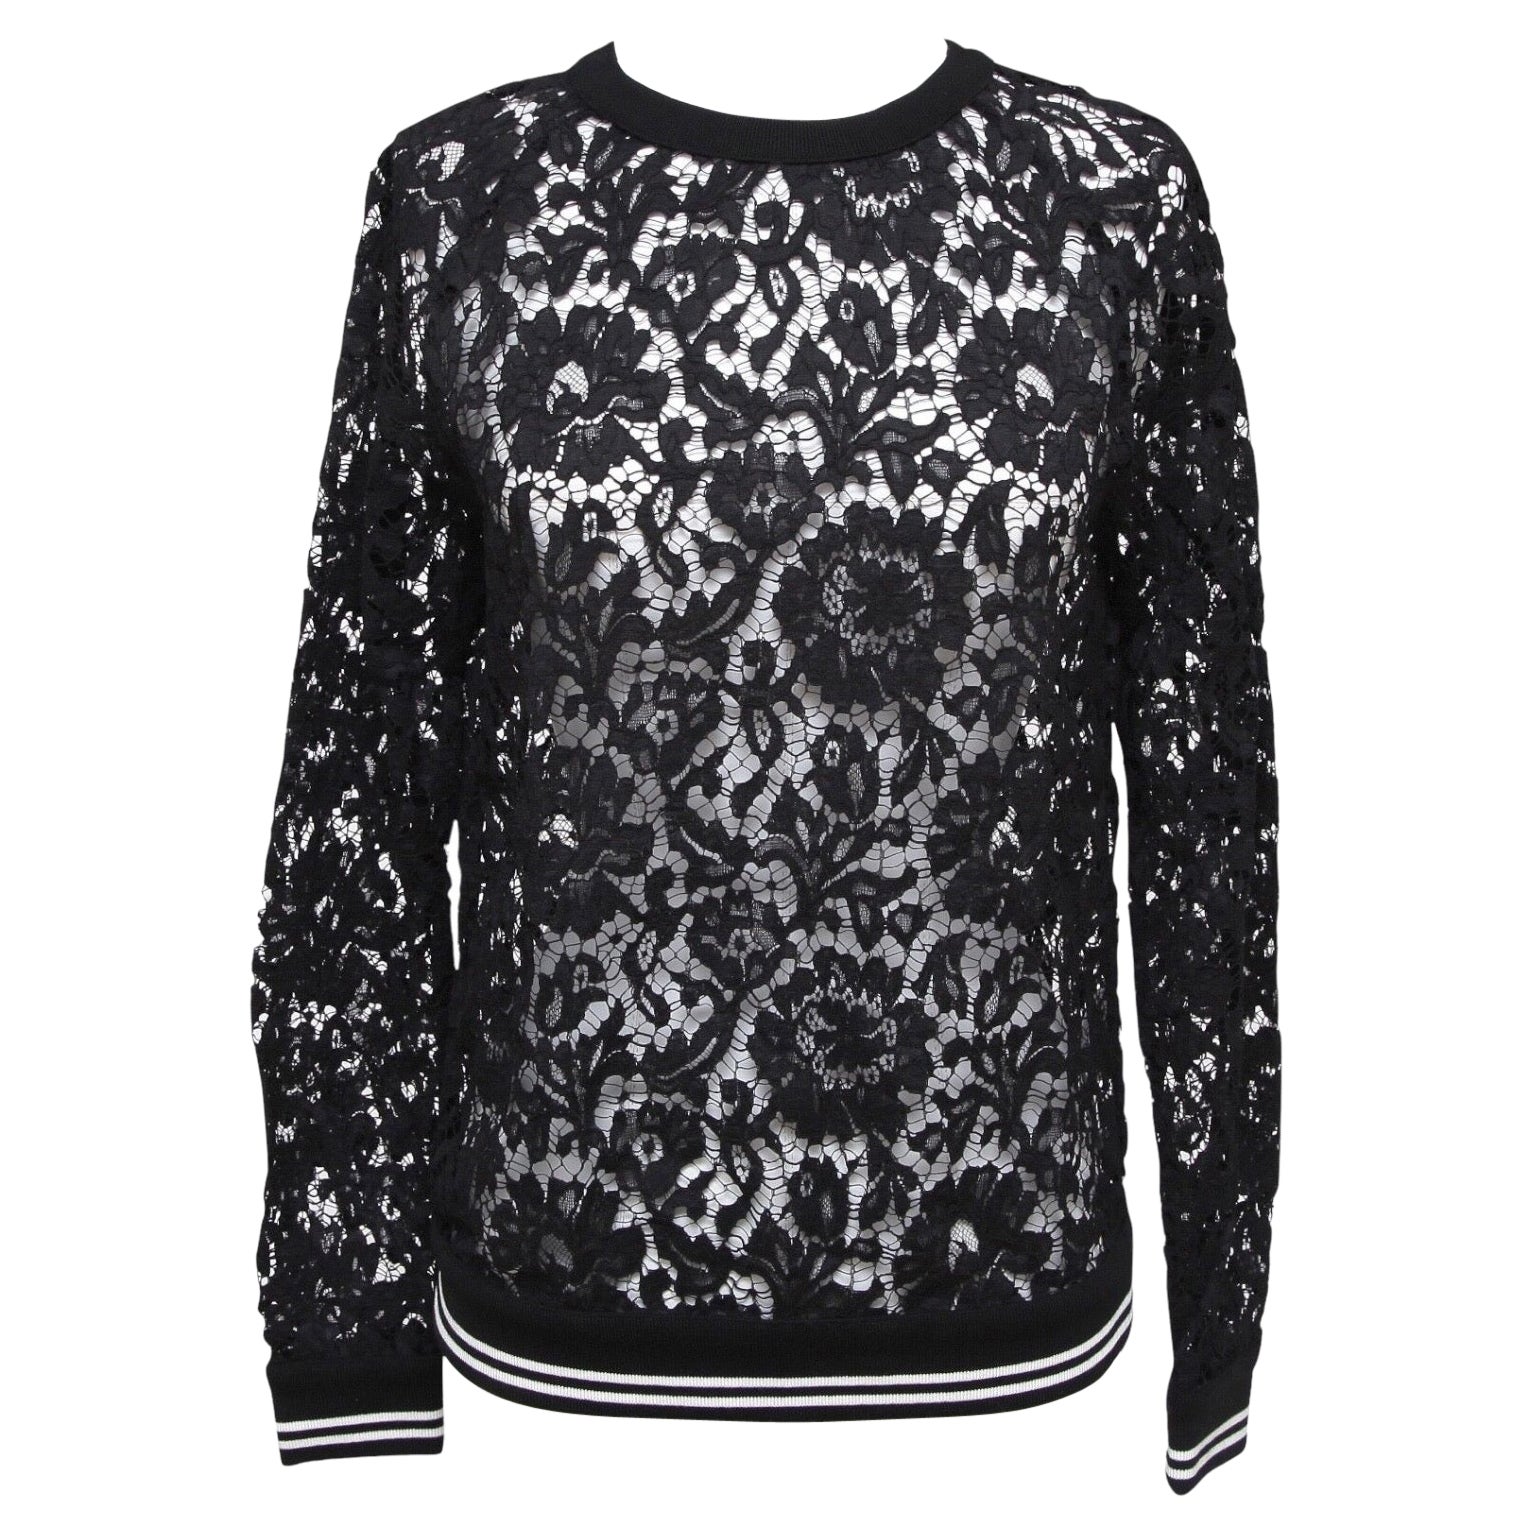 VALENTINO Floral Lace Blouse Top Shirt Long Sleeve Black White Sz S BNWT For Sale